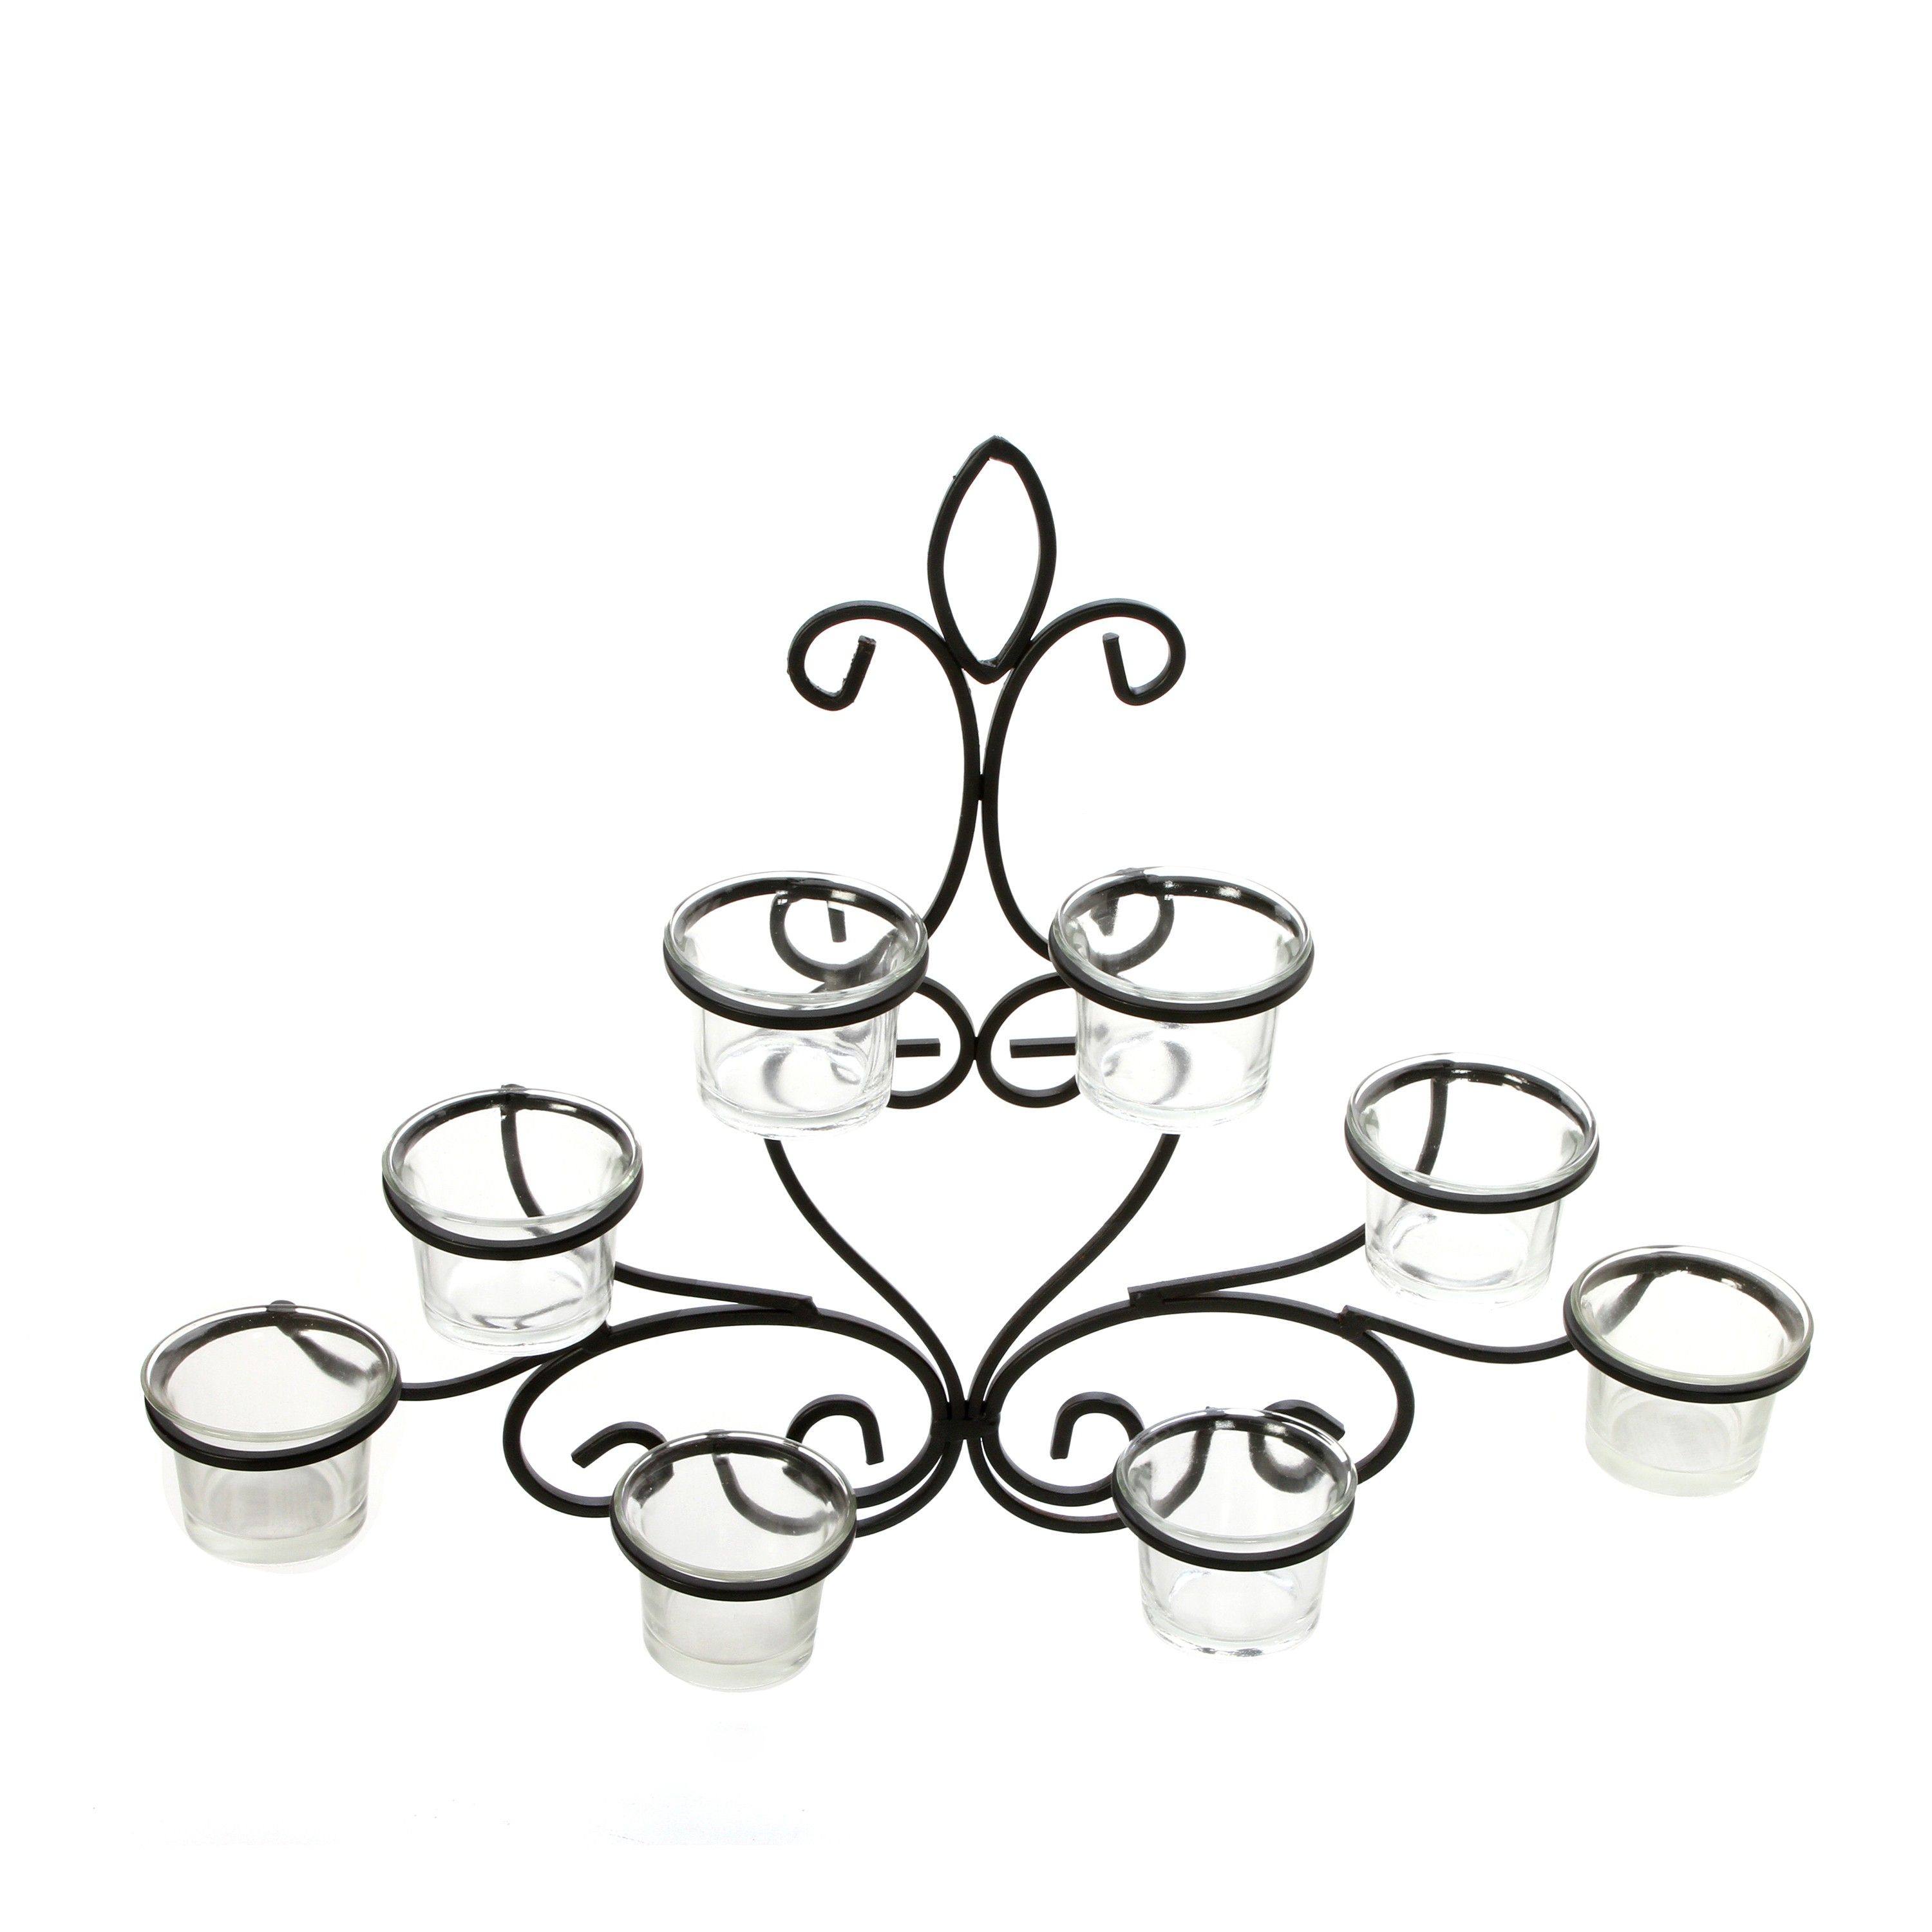 Hosley's Scrolled Wall Sconce 13.6" Length, 8 Votive/led Tea Light Cup  Holder, Includes Glass Cups. O3 In Three Glass Holder Wall Decor (Photo 30 of 30)